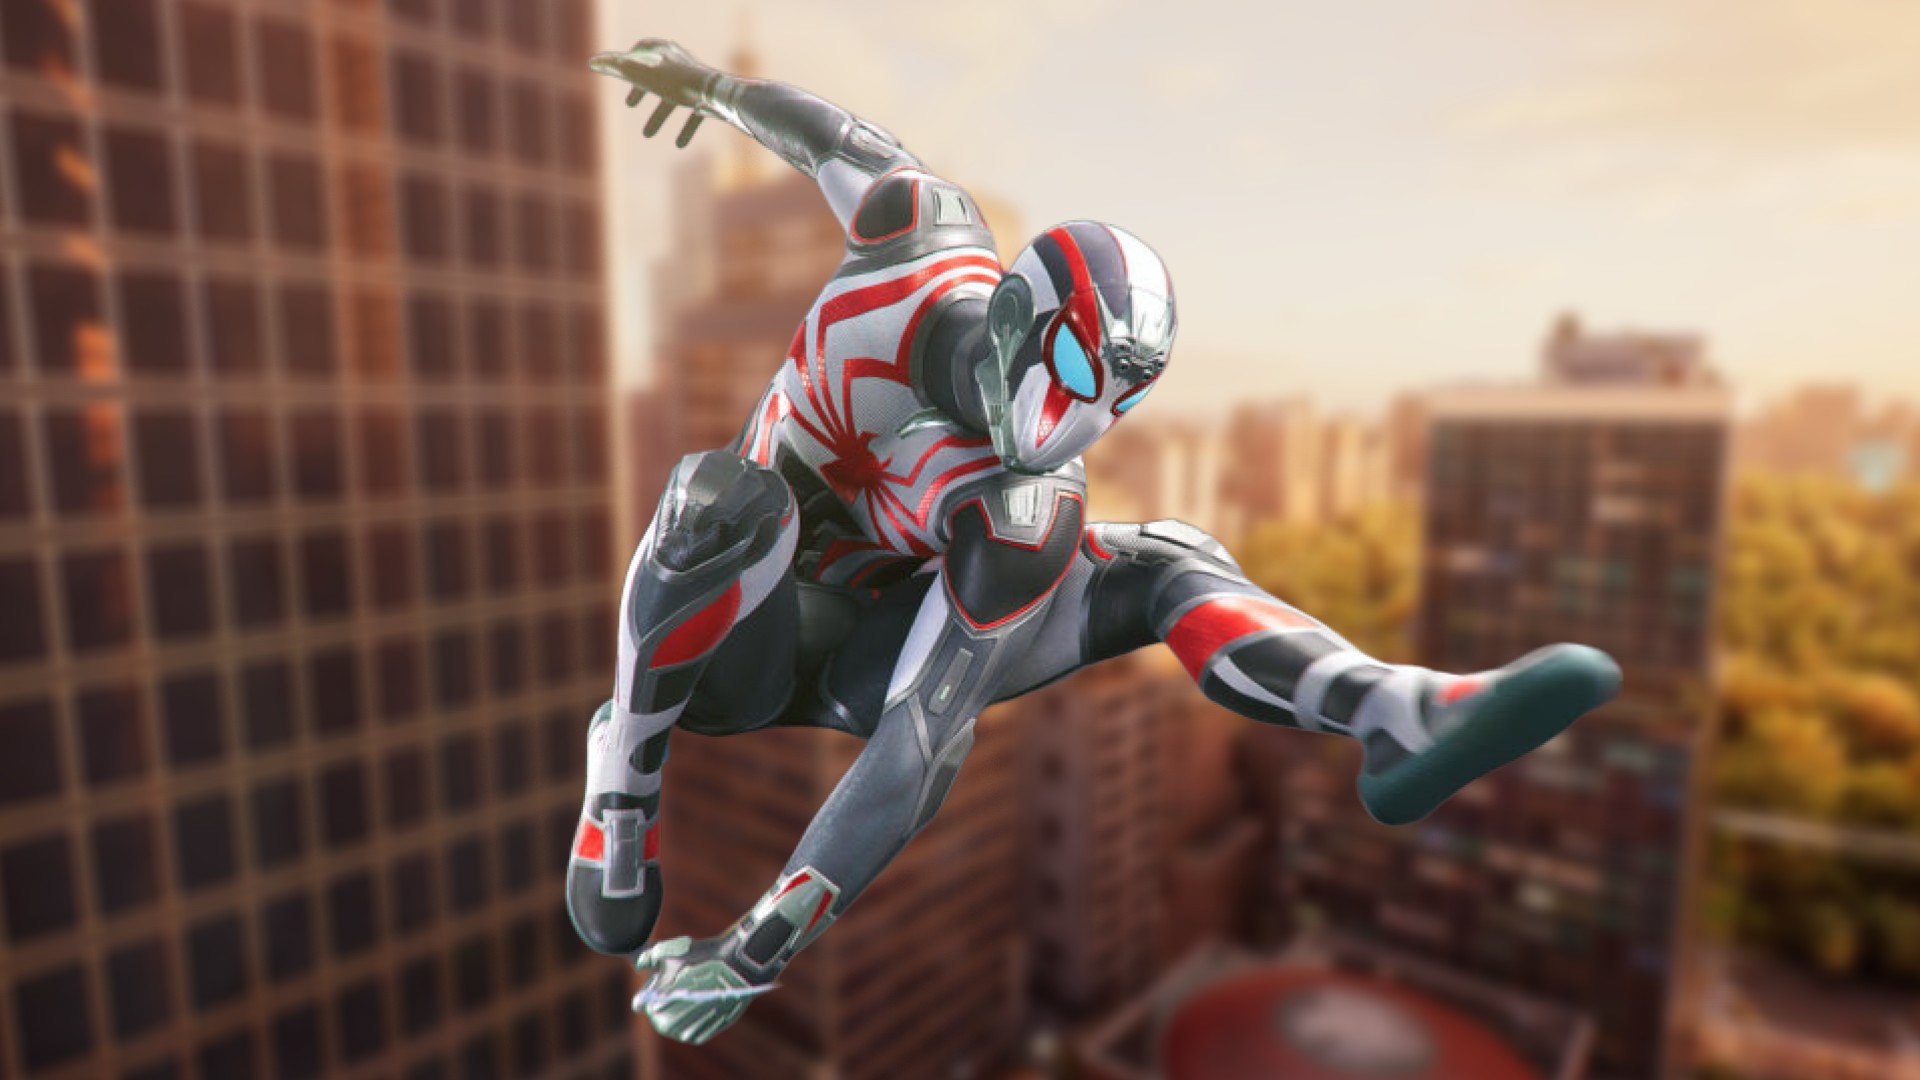 All Spider-Man games released so far - check prices & availability